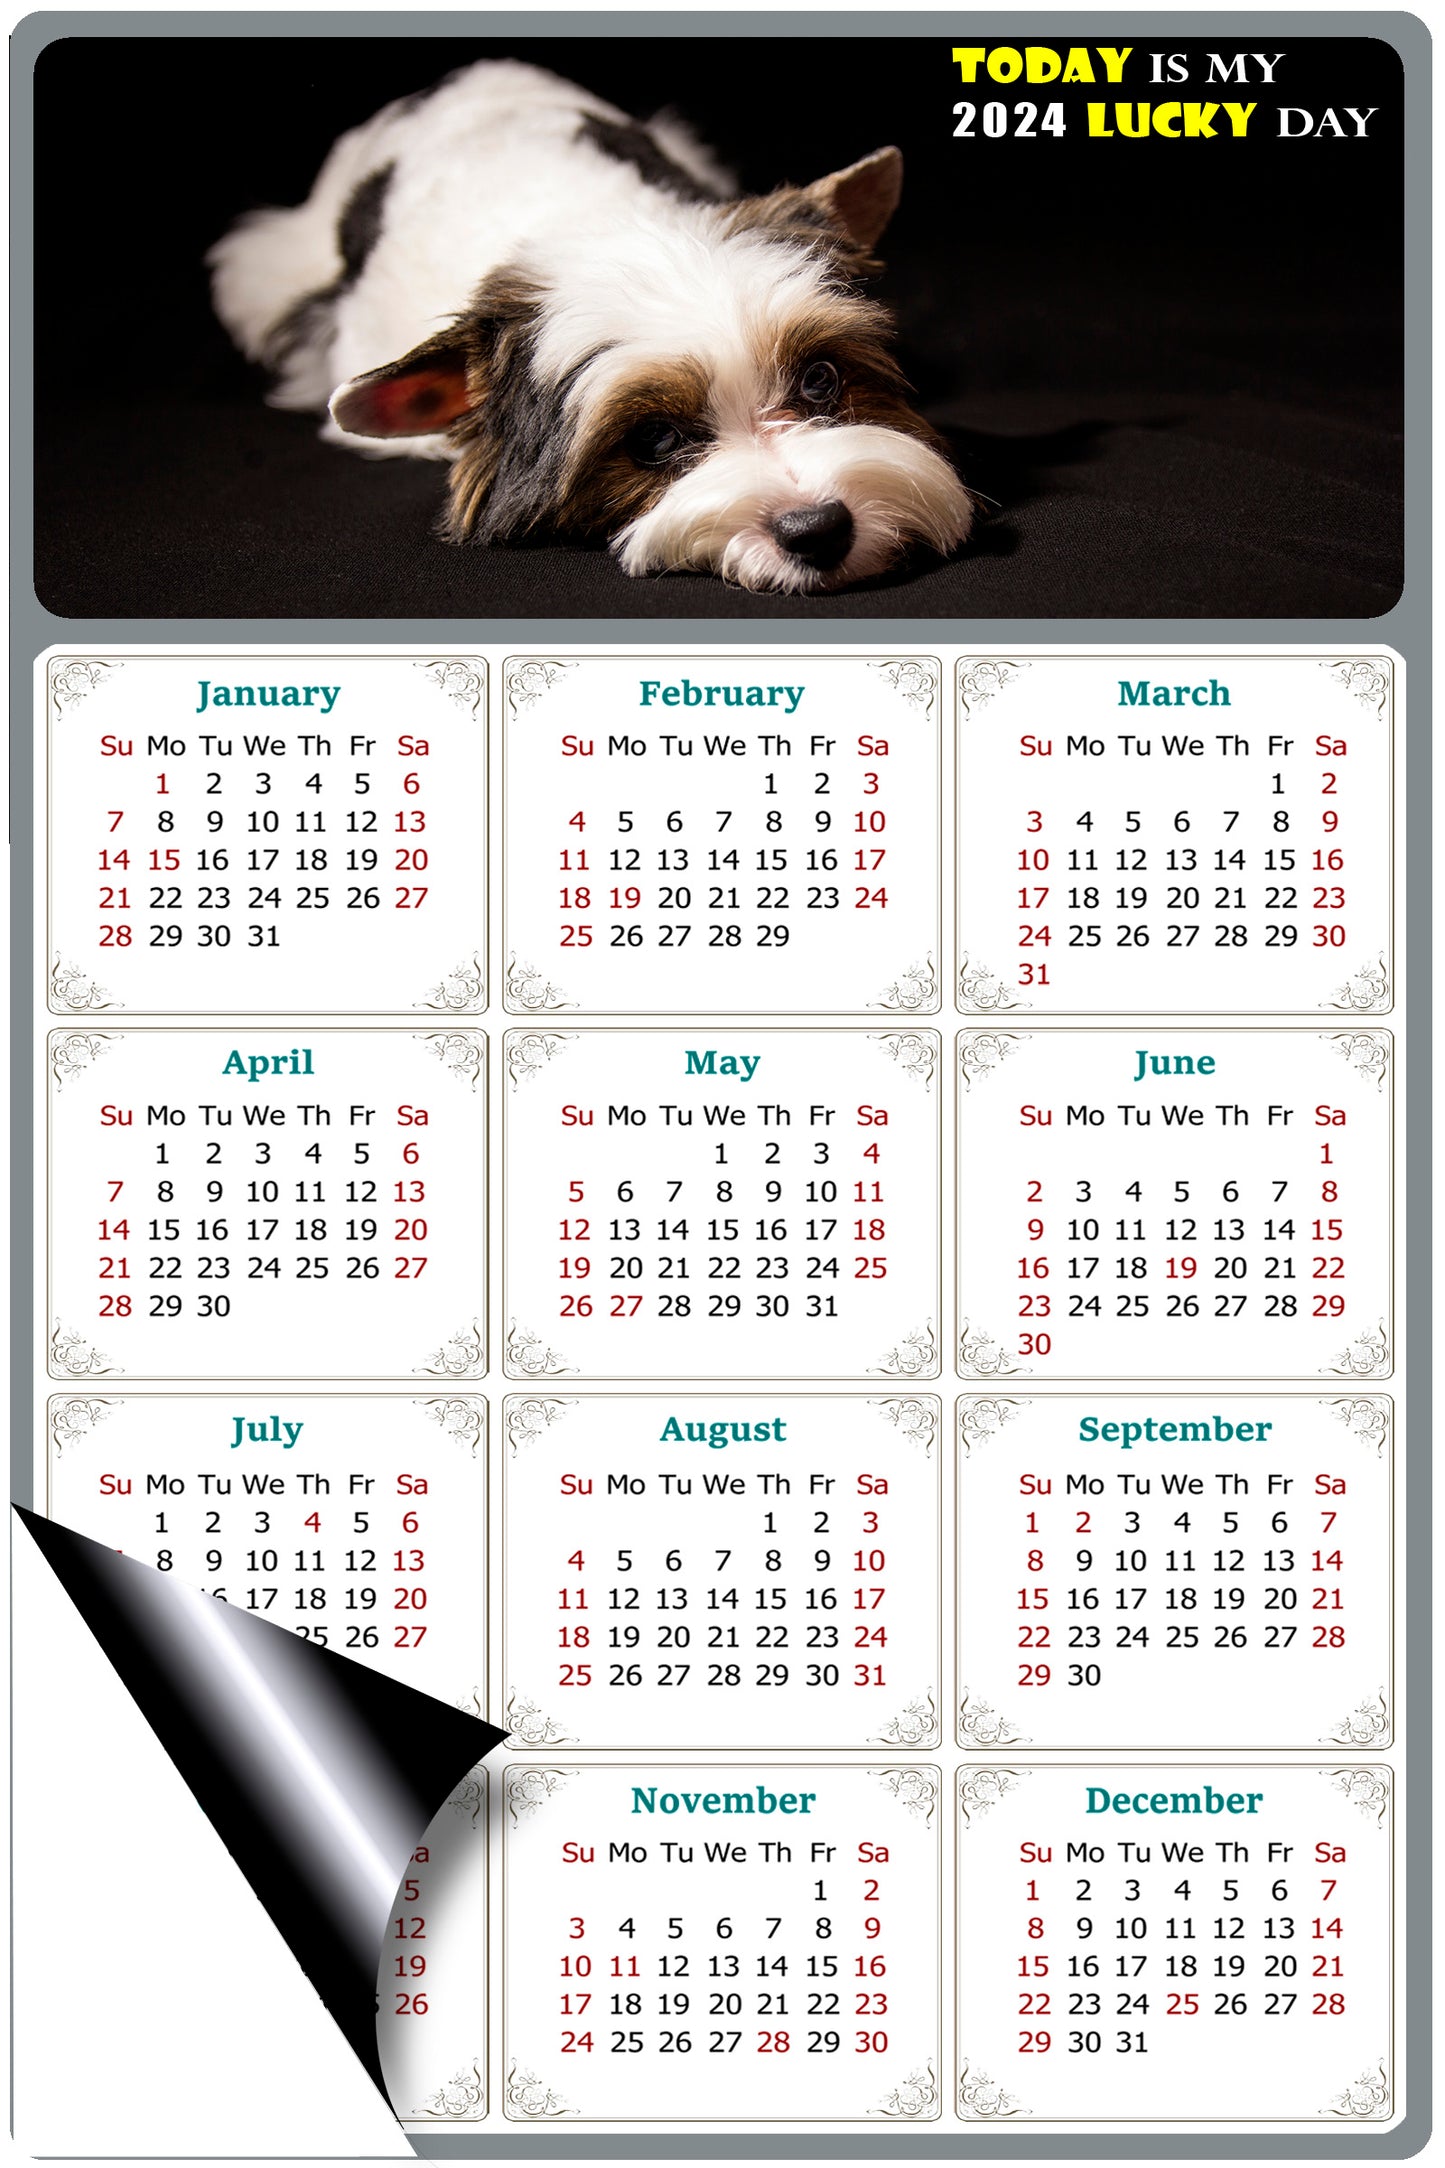 2024 Magnetic Calendar - Today is My Lucky Day (Fade, Tear, and Water Resistant)- Dogs Themed 018